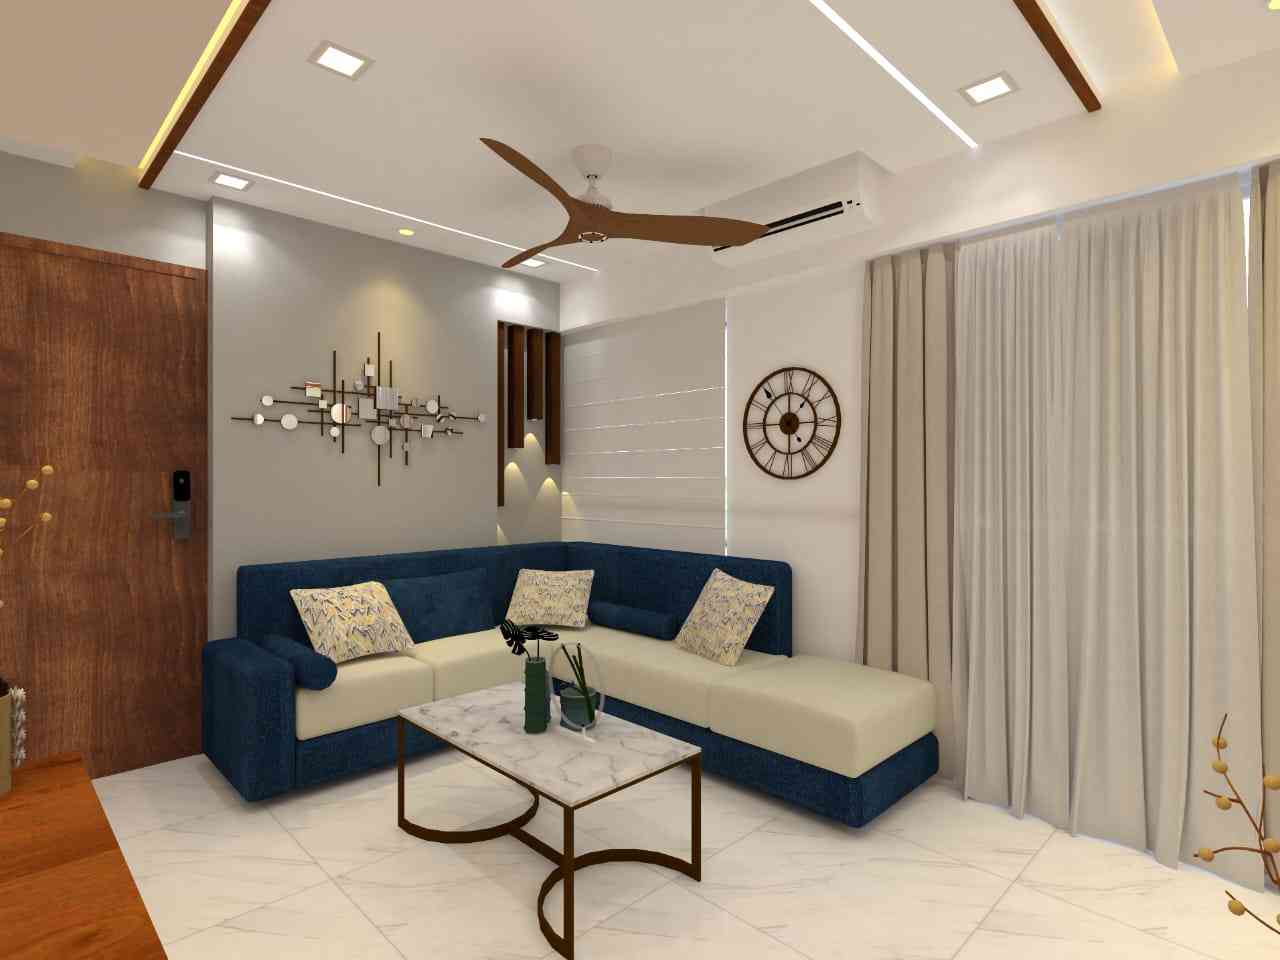 Modern Living Area Design With L-Shaped Sofa